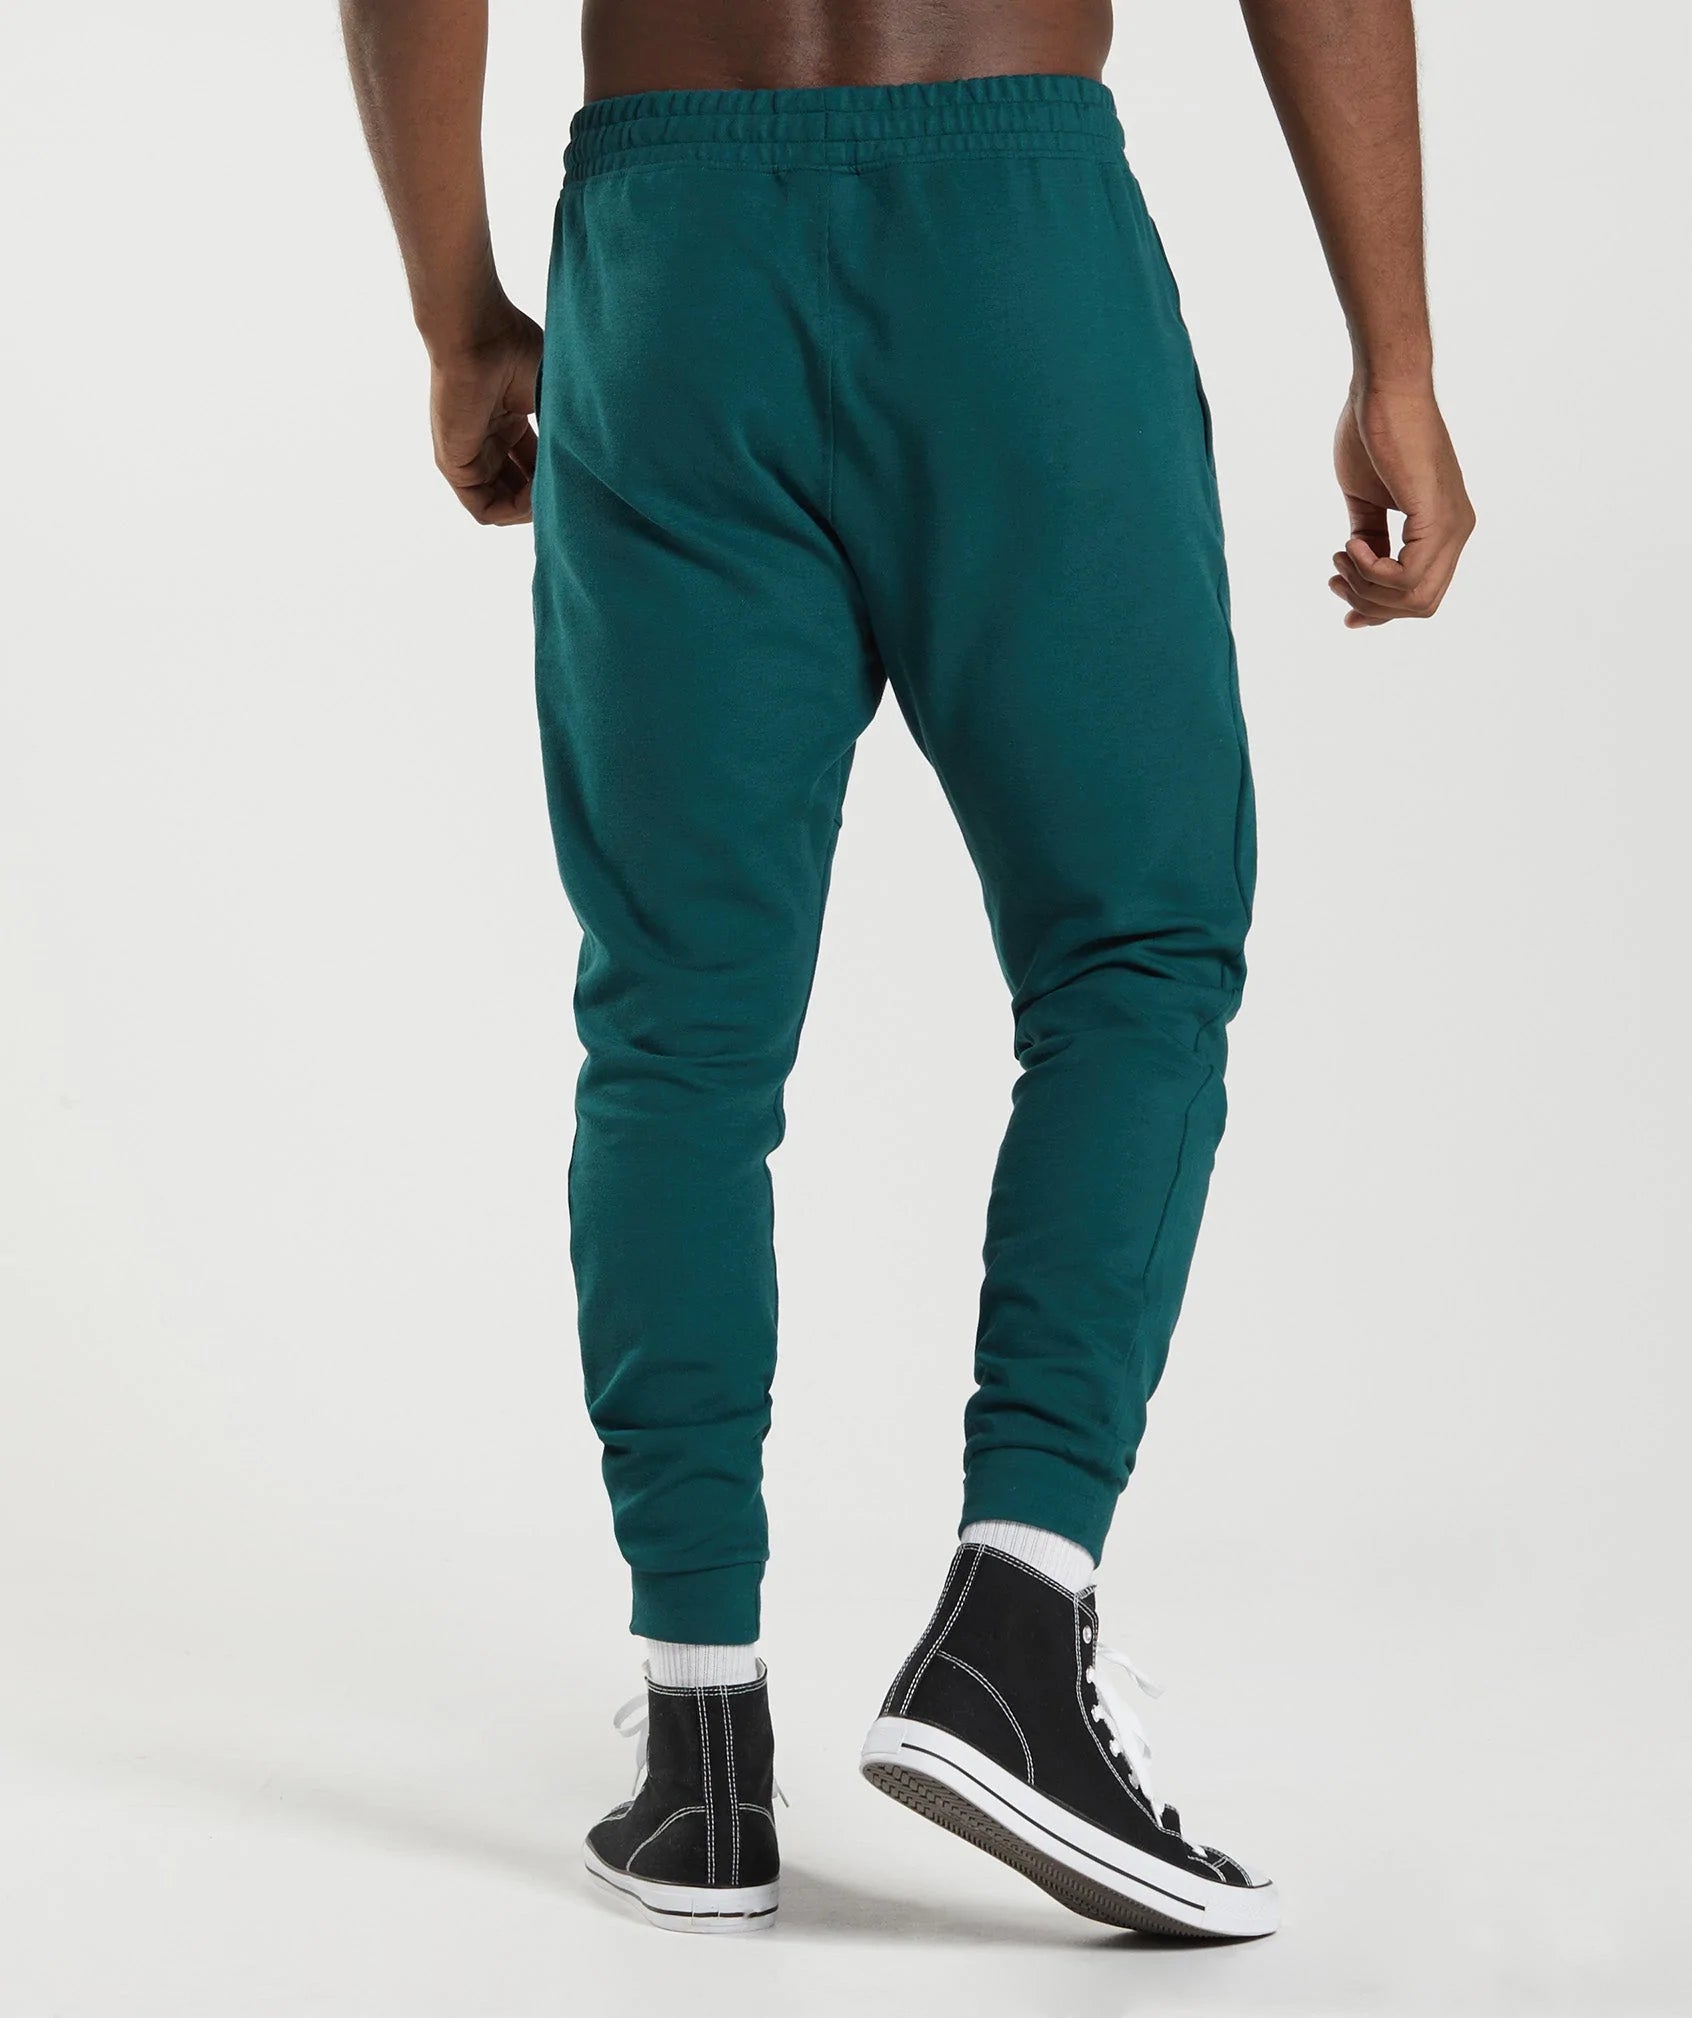 React Joggers in Winter Teal - view 2